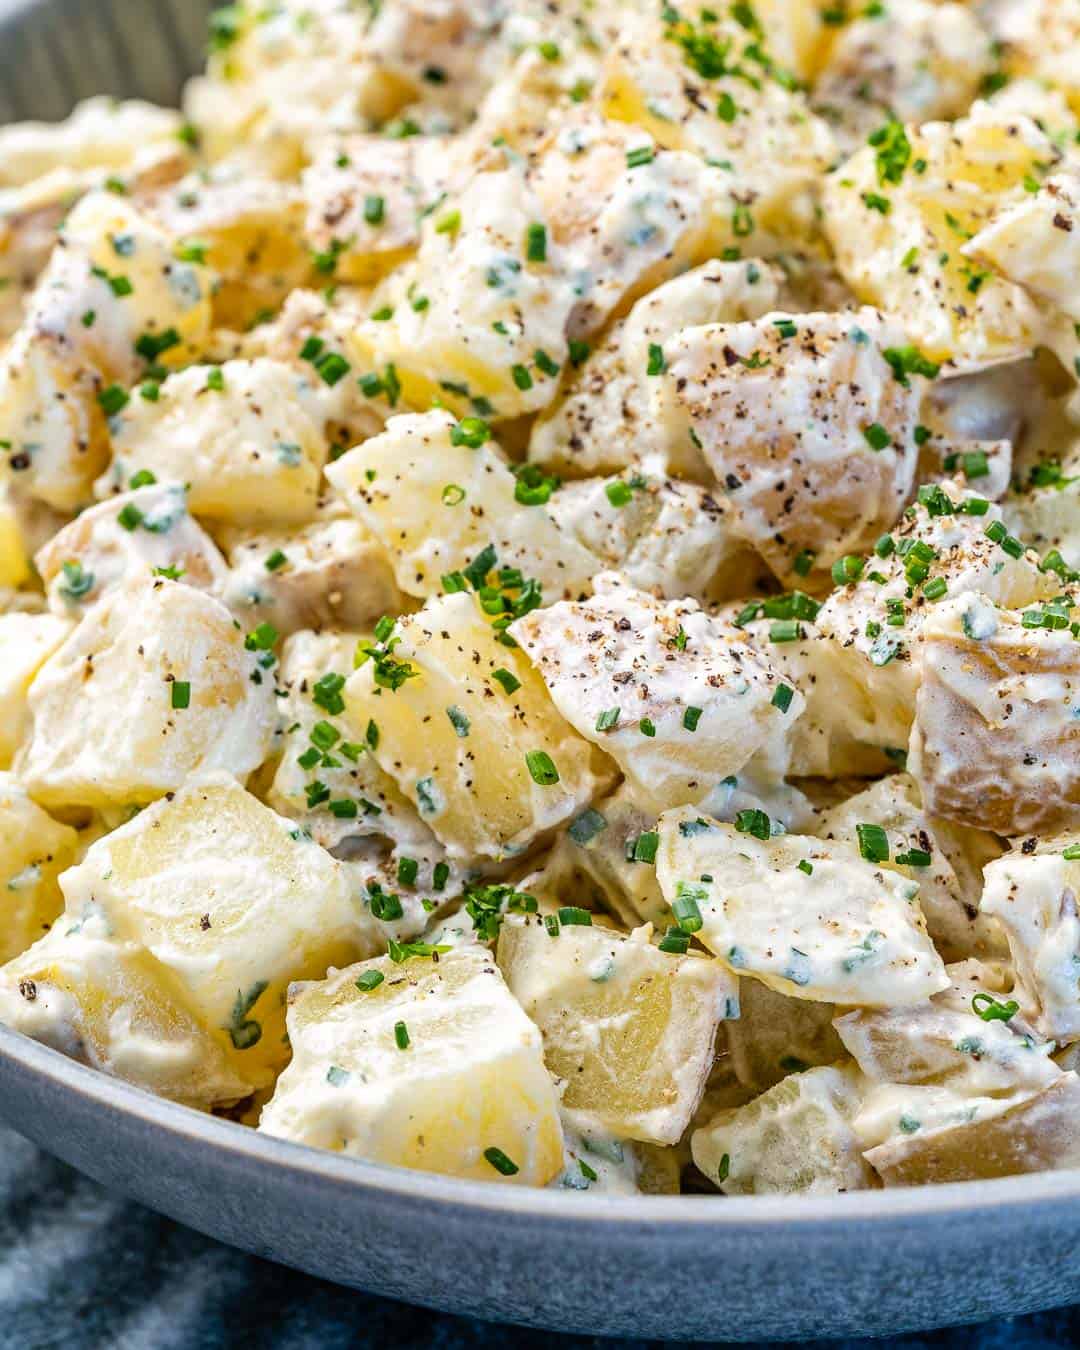 Really close view of easy mustard sauce on potato salad in gray bowl